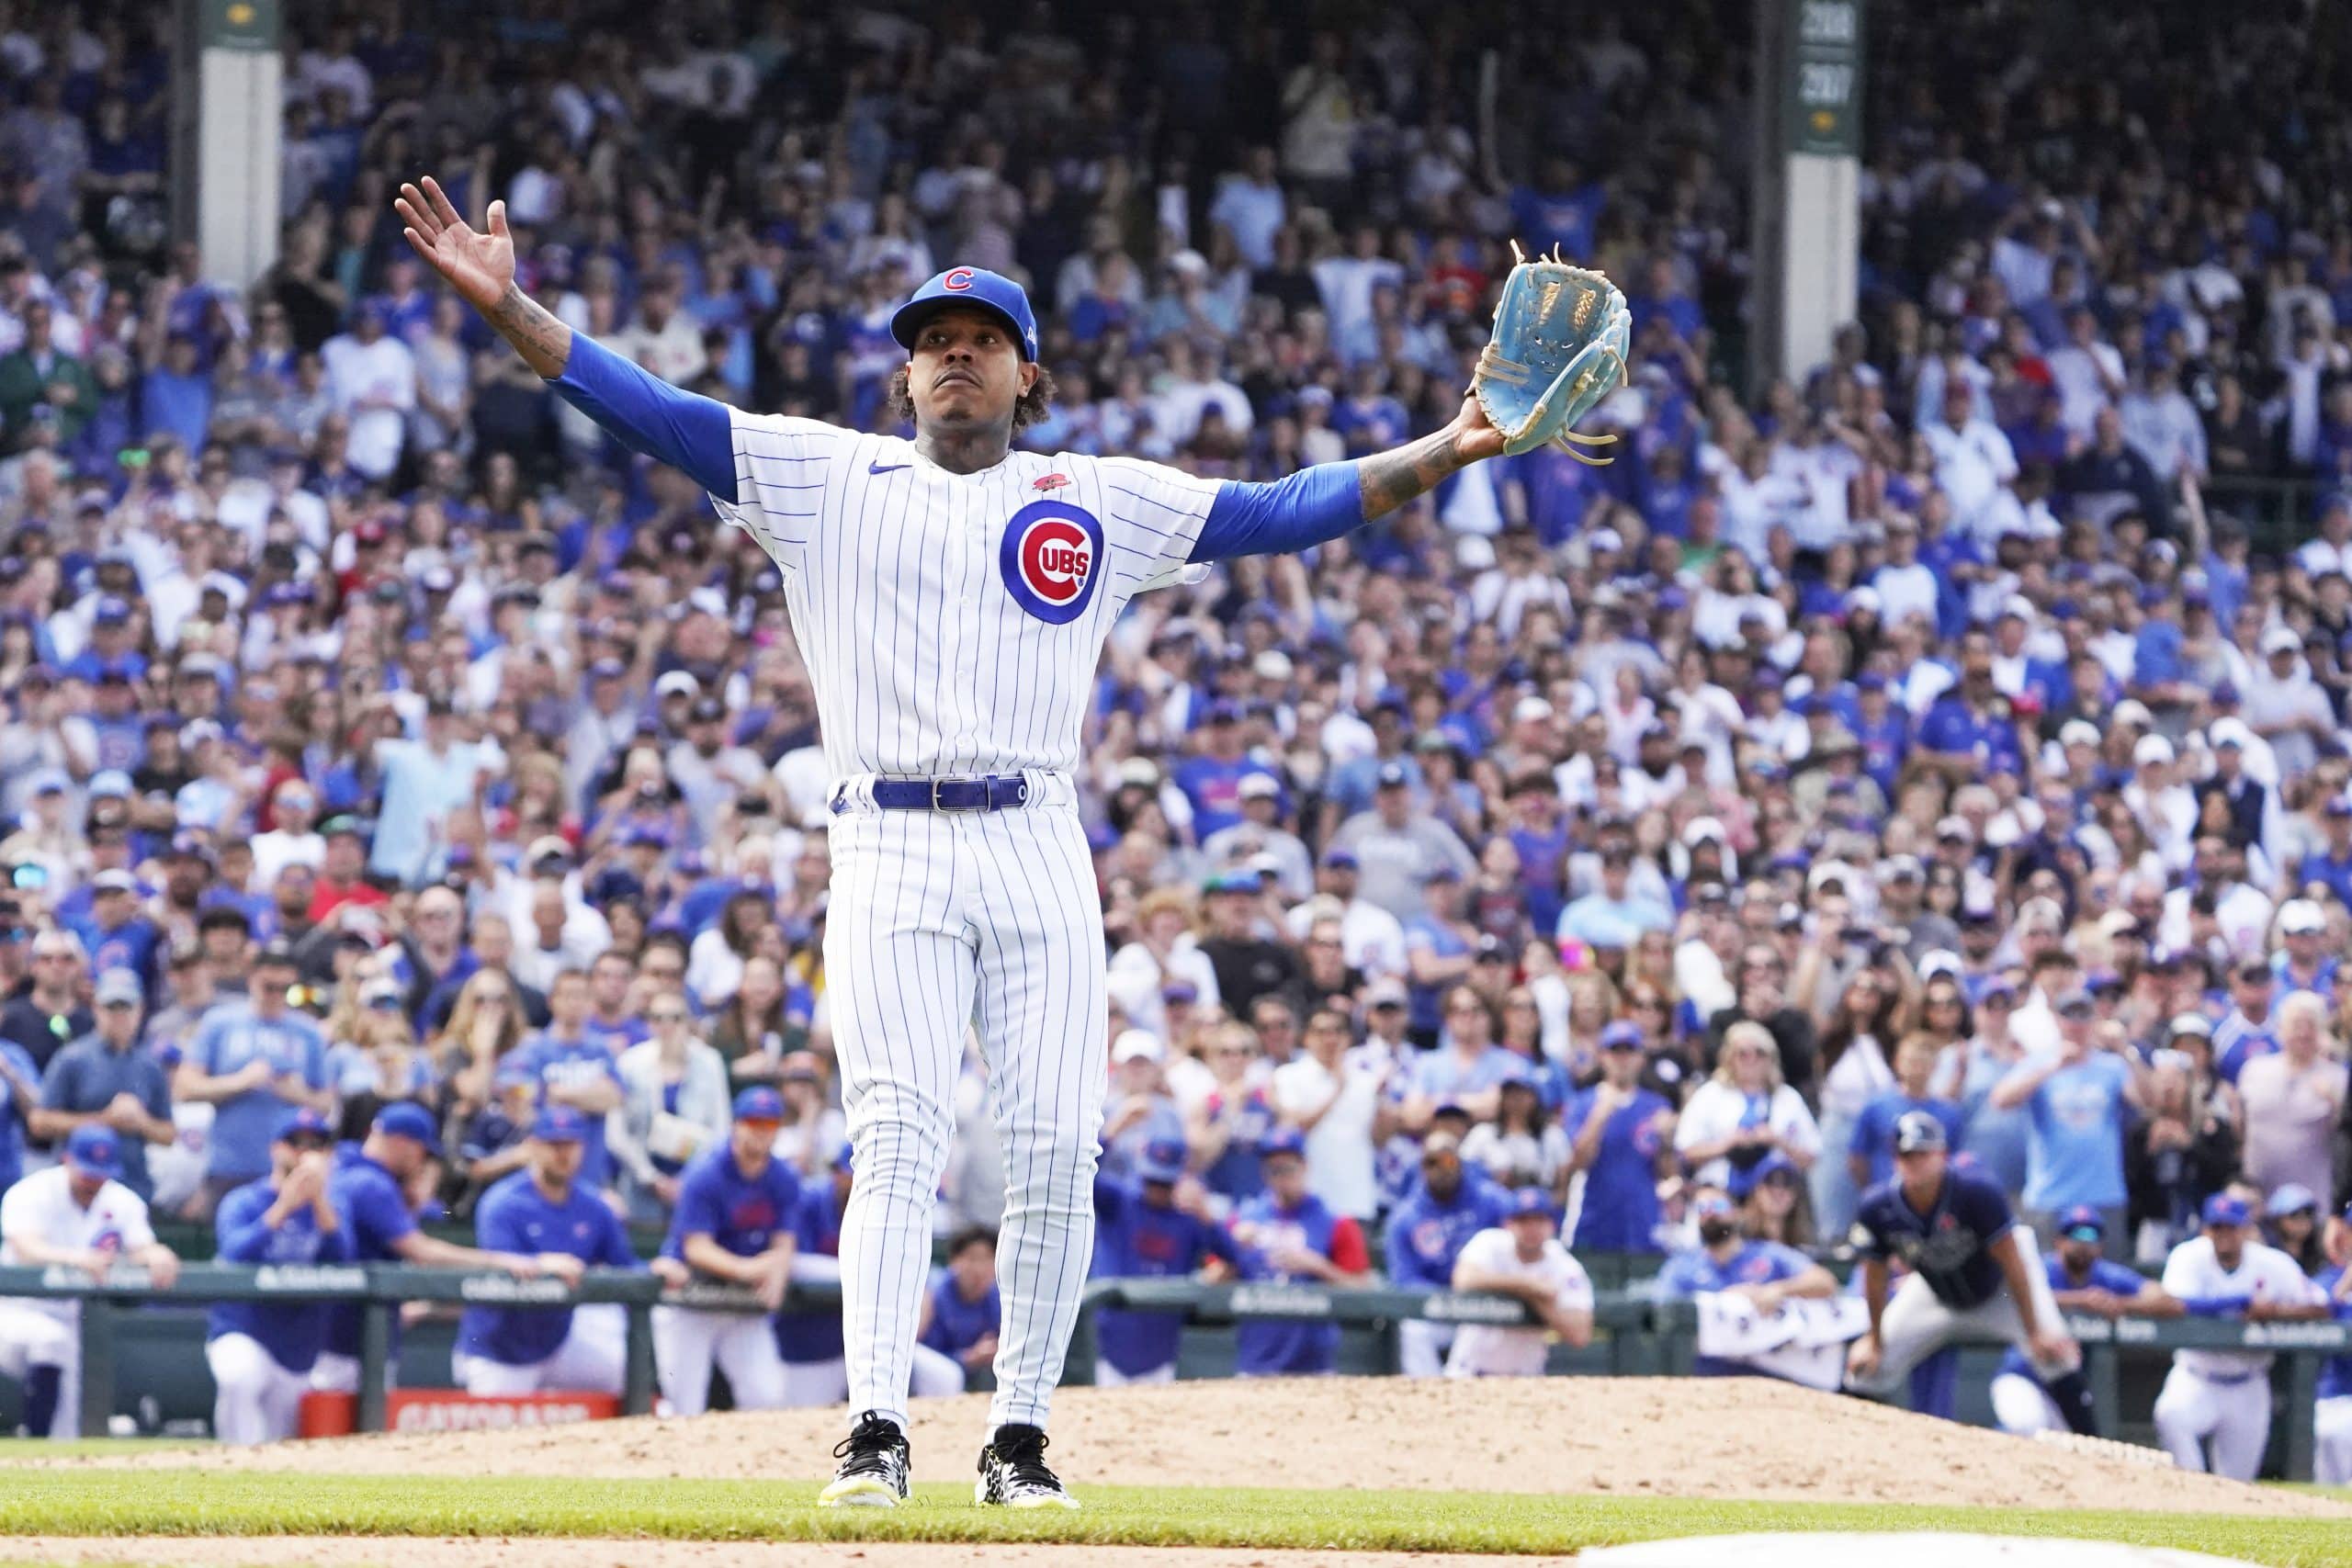 Cubs rotation holding firm, but challenges are mounting - Chicago Sun-Times